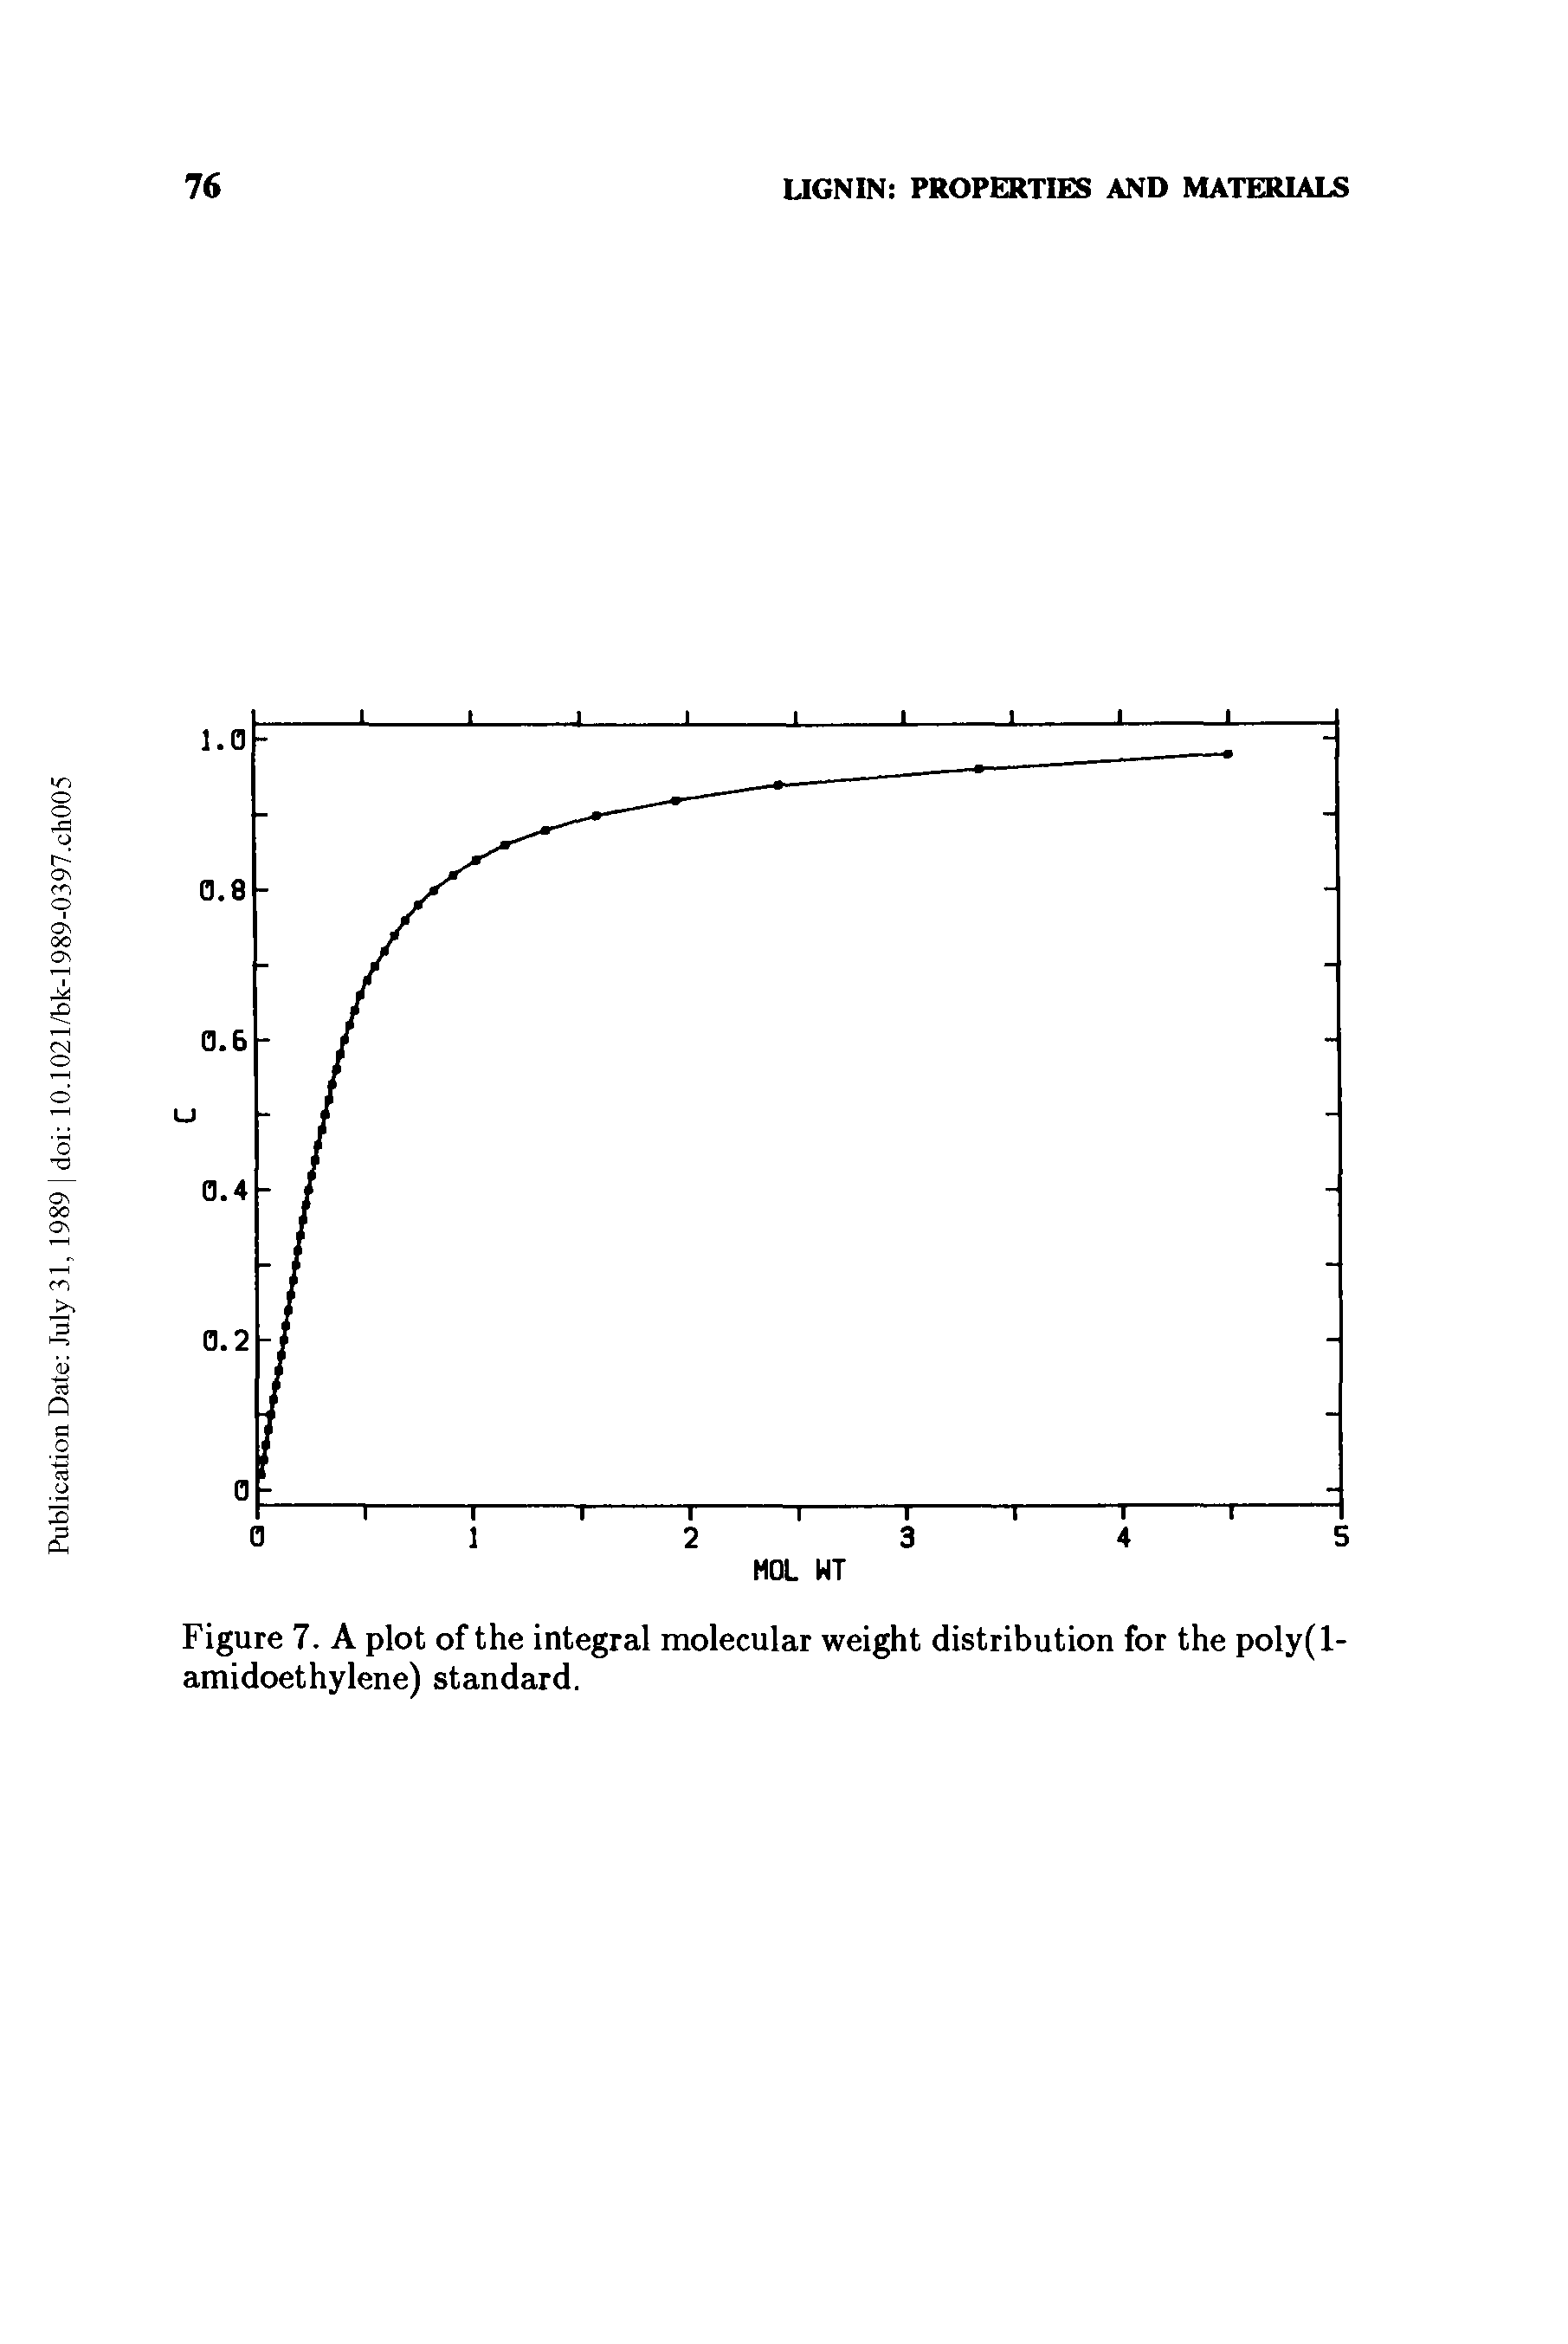 Figure 7. A plot of the integral molecular weight distribution for the poly(l-amidoethylene) standard.